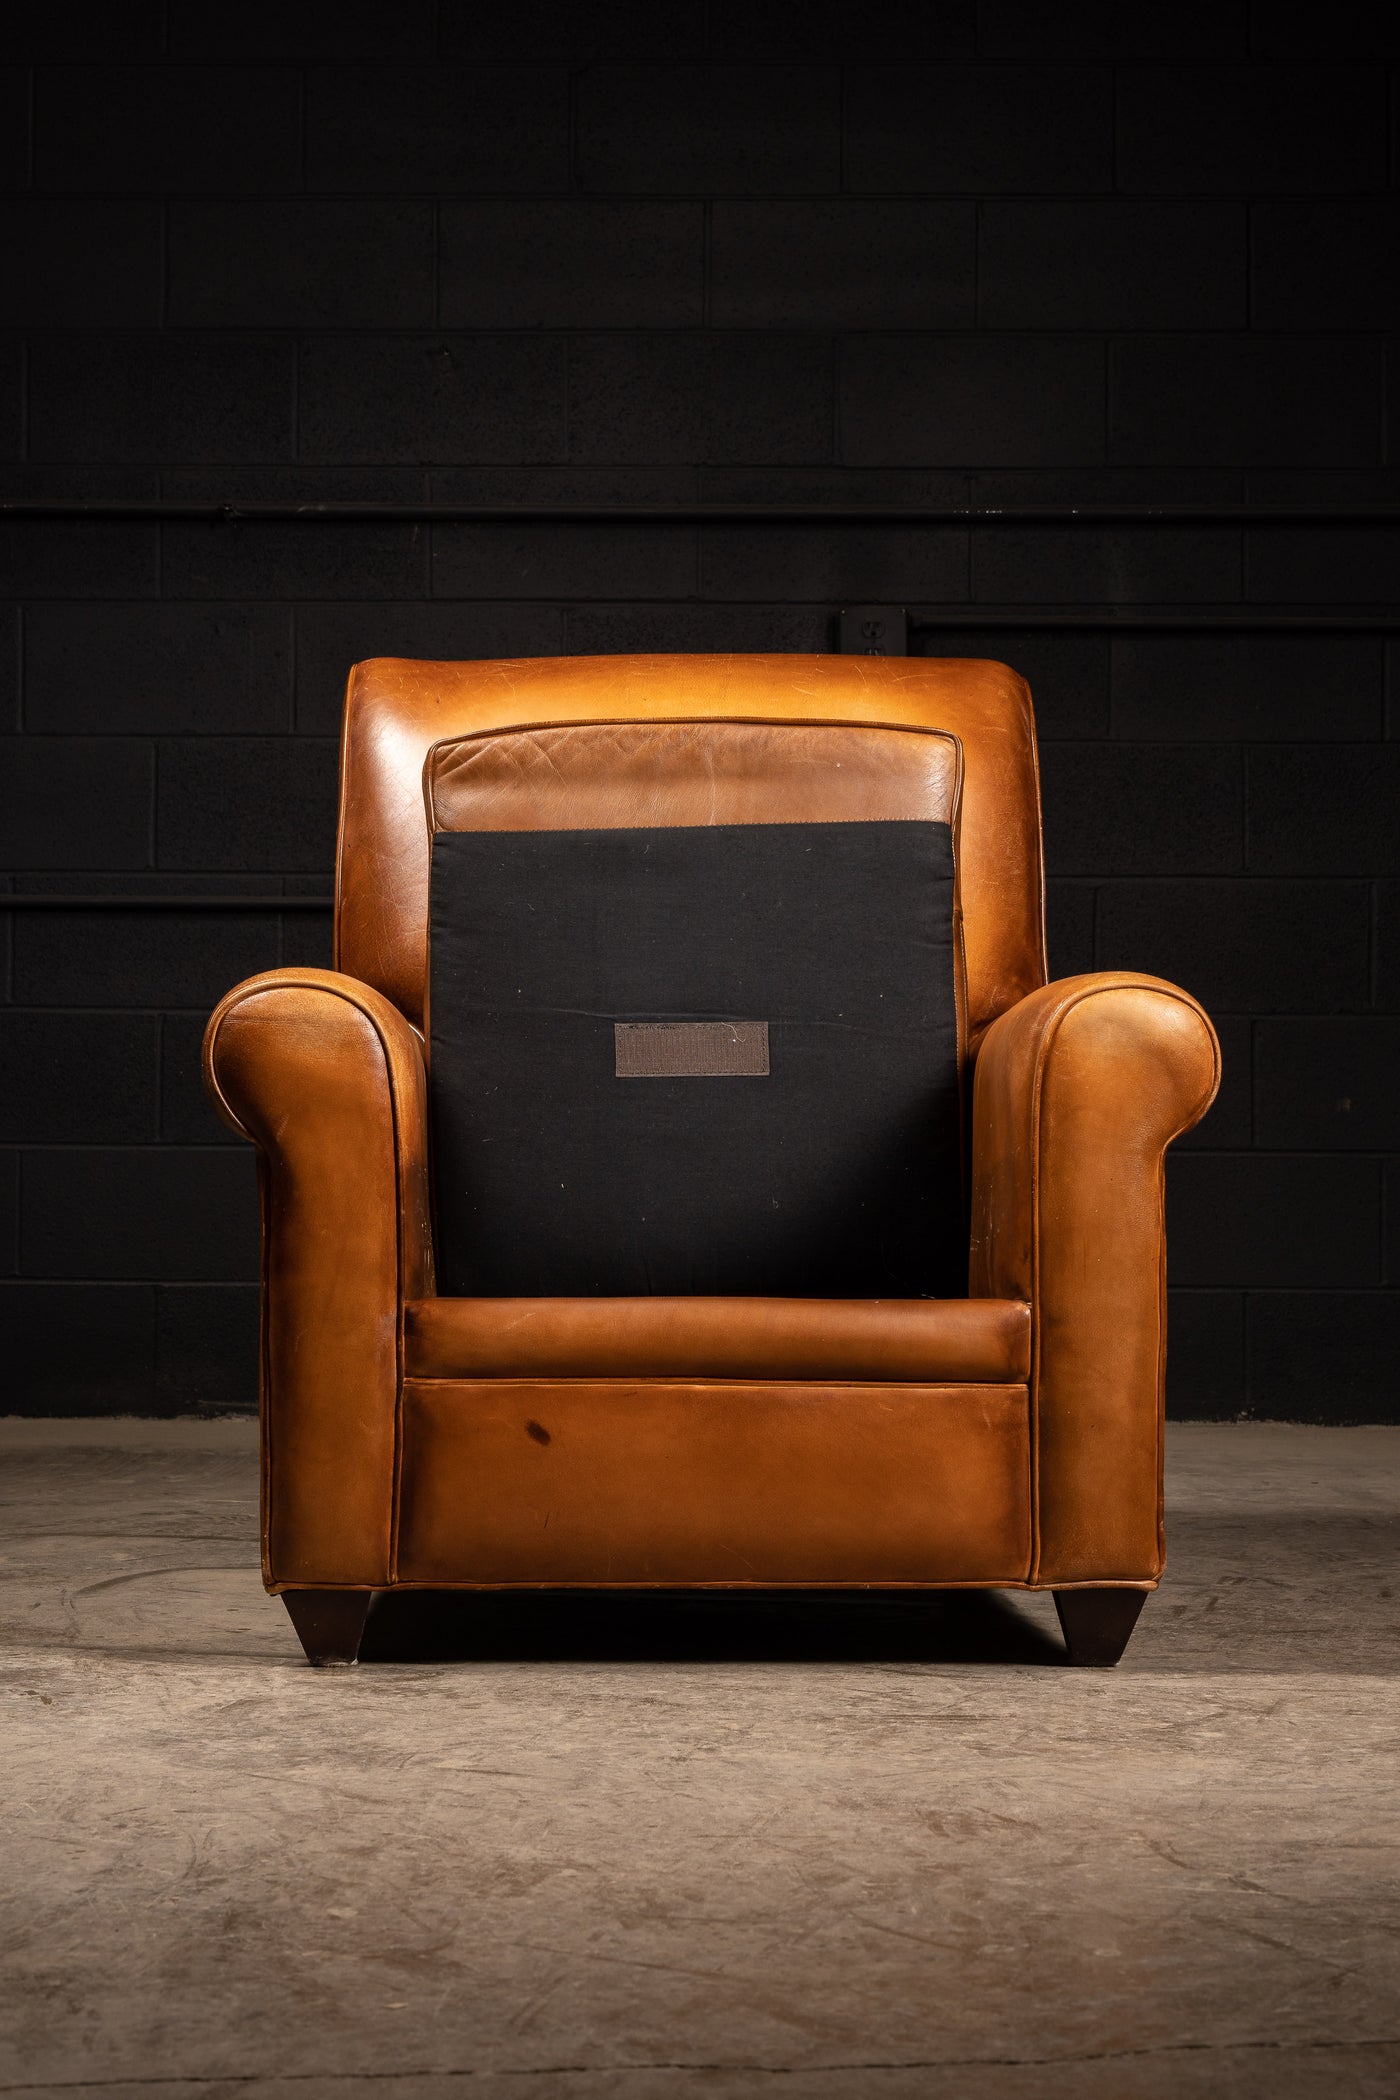 Contemporary Tobacco-Colored Leather Club Chair and Ottoman